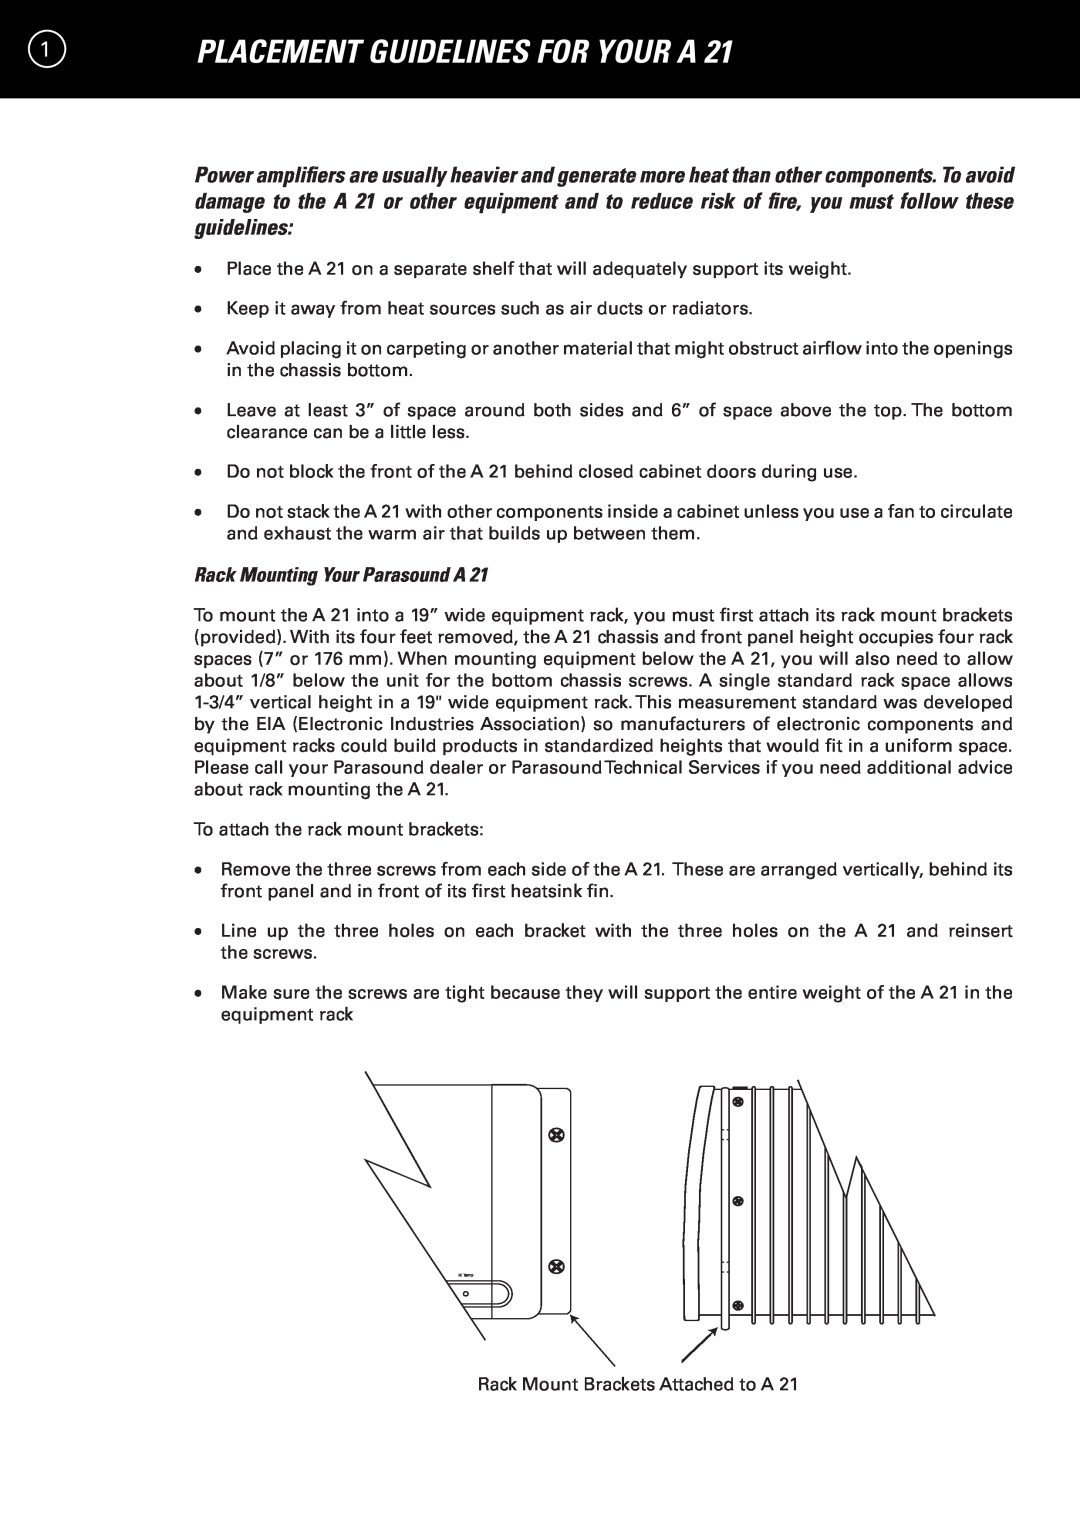 Parasound A 21 manual Placement Guidelines For Your A, Rack Mounting Your Parasound A 